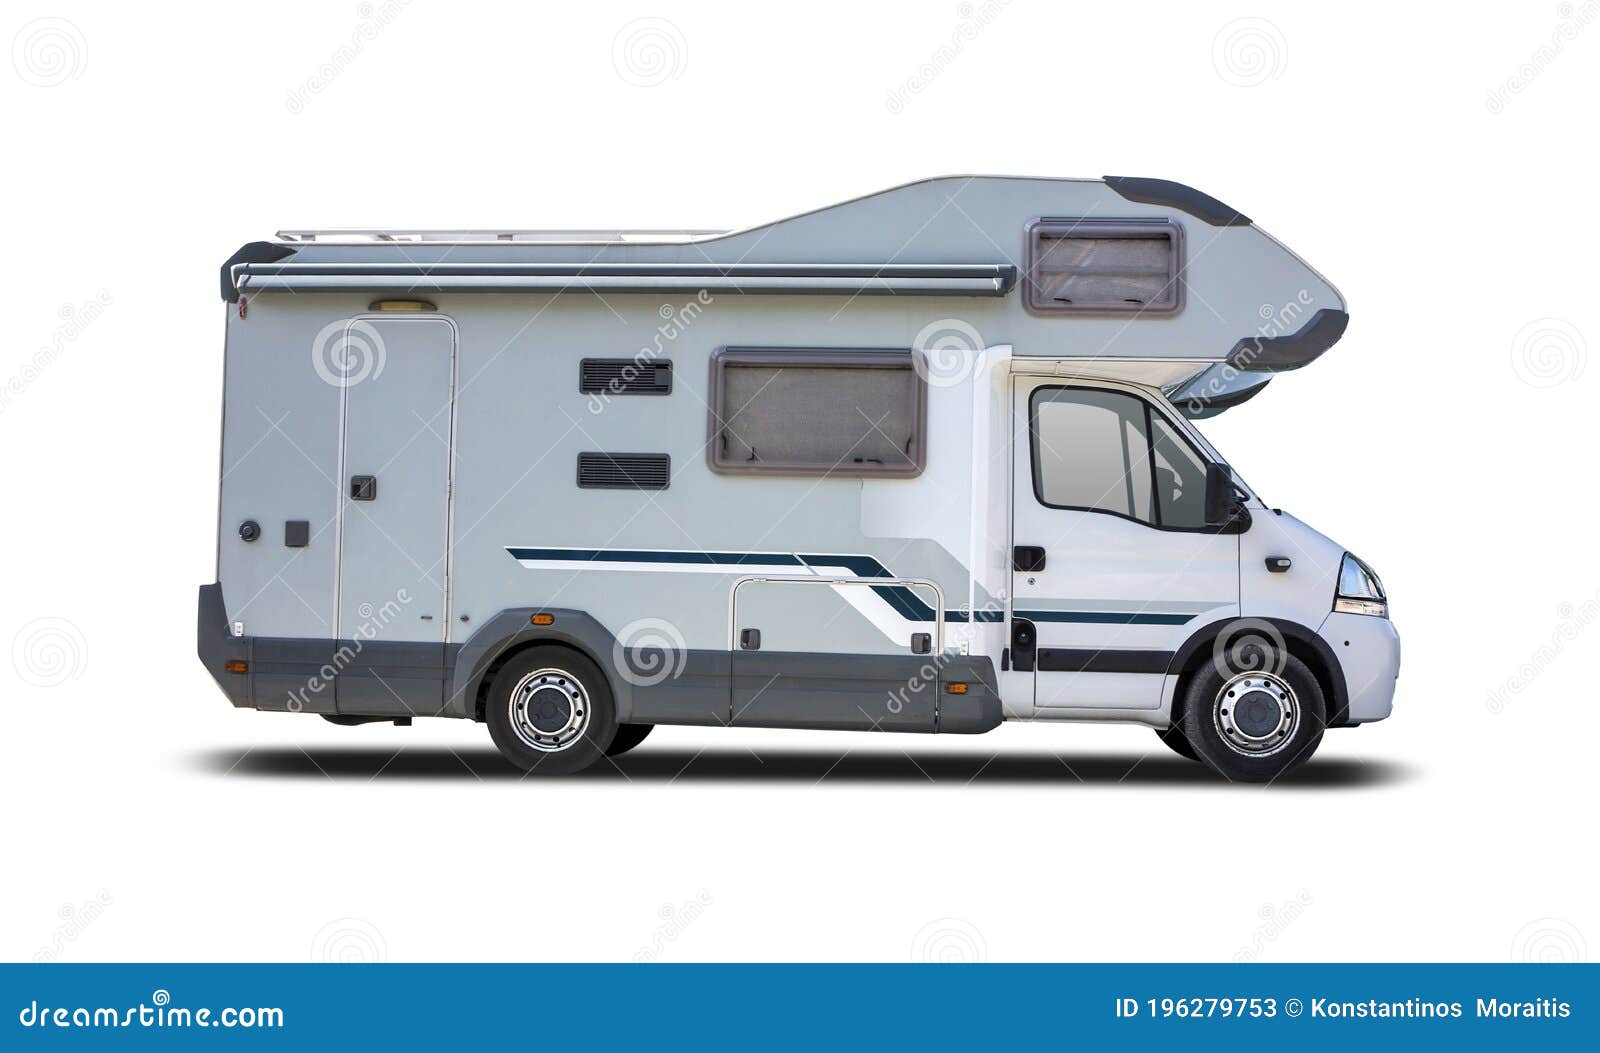 French Motorhome Side View Isolated on White Stock Image - Image of ...